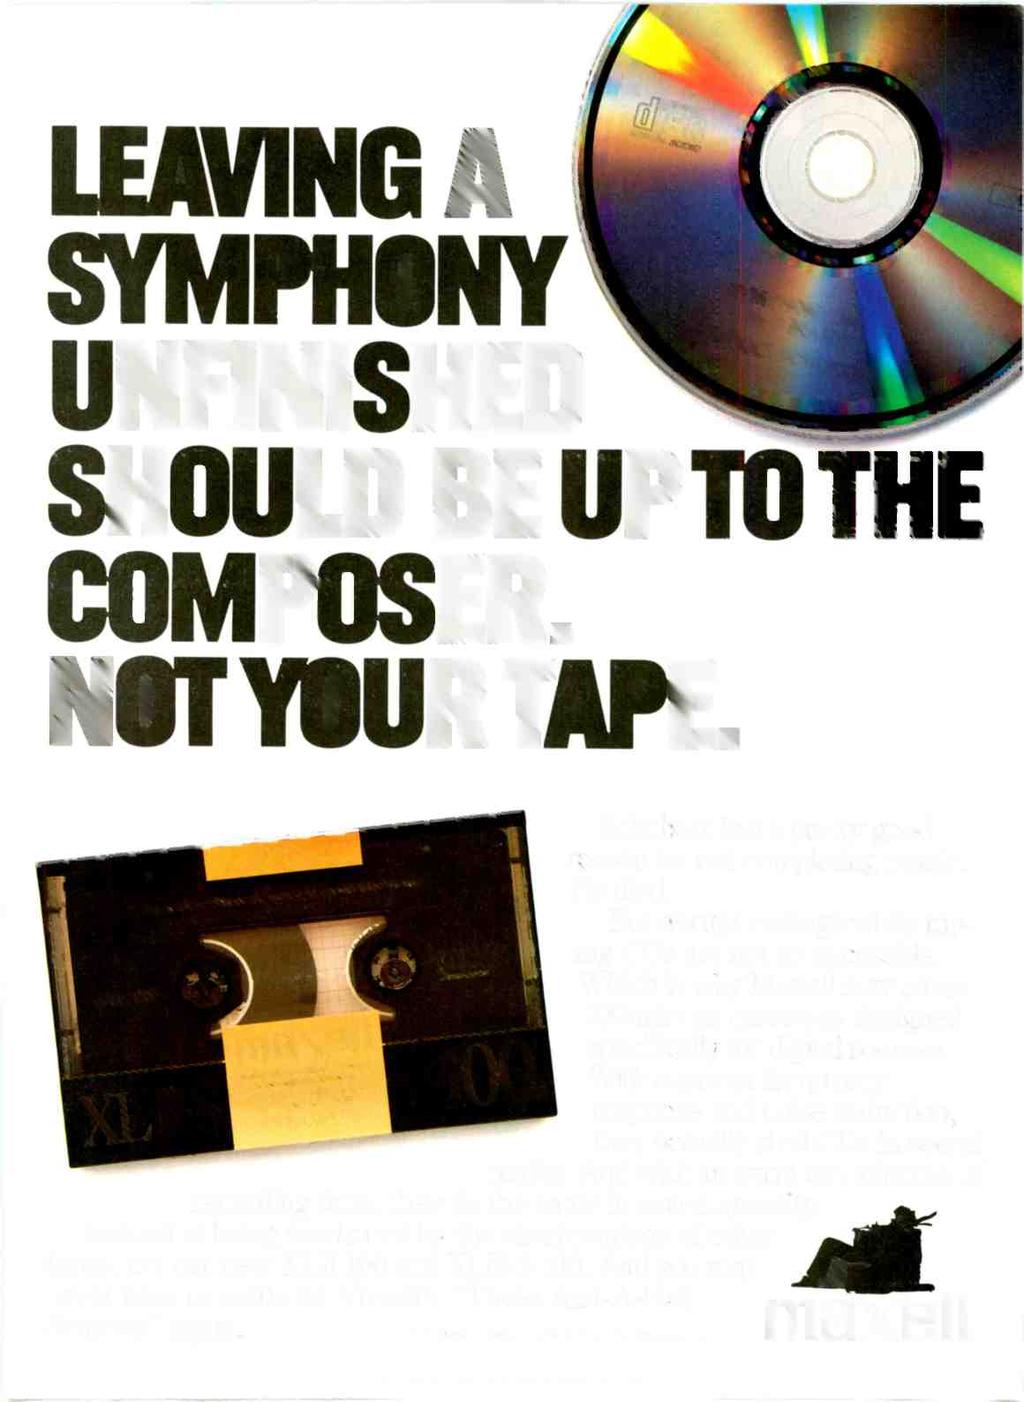 LEAVING A SYMPHONY UNFINISHED SHOULD BE UP TO THE COMPOSER. NOT YOUR TAPE.